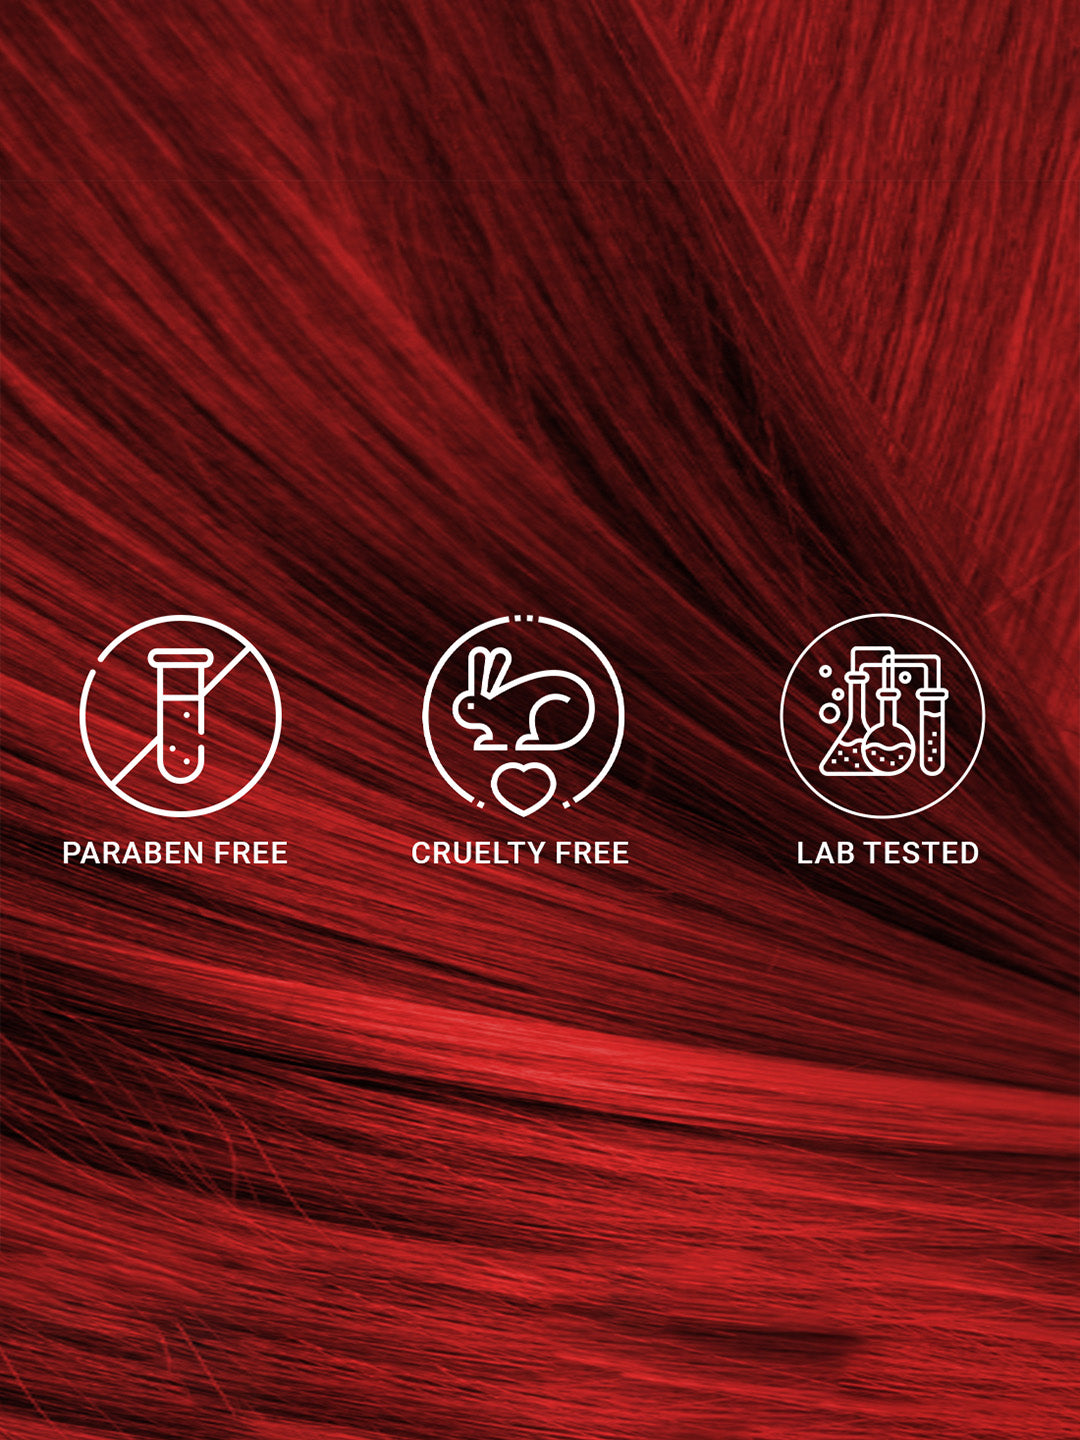 Nishman Professional Hair Color Spray | Cruelty, Peroxide & Ammonia Free |Suitable For Daily Use | Unisex Temporary Hair Color - Red | 150 ML